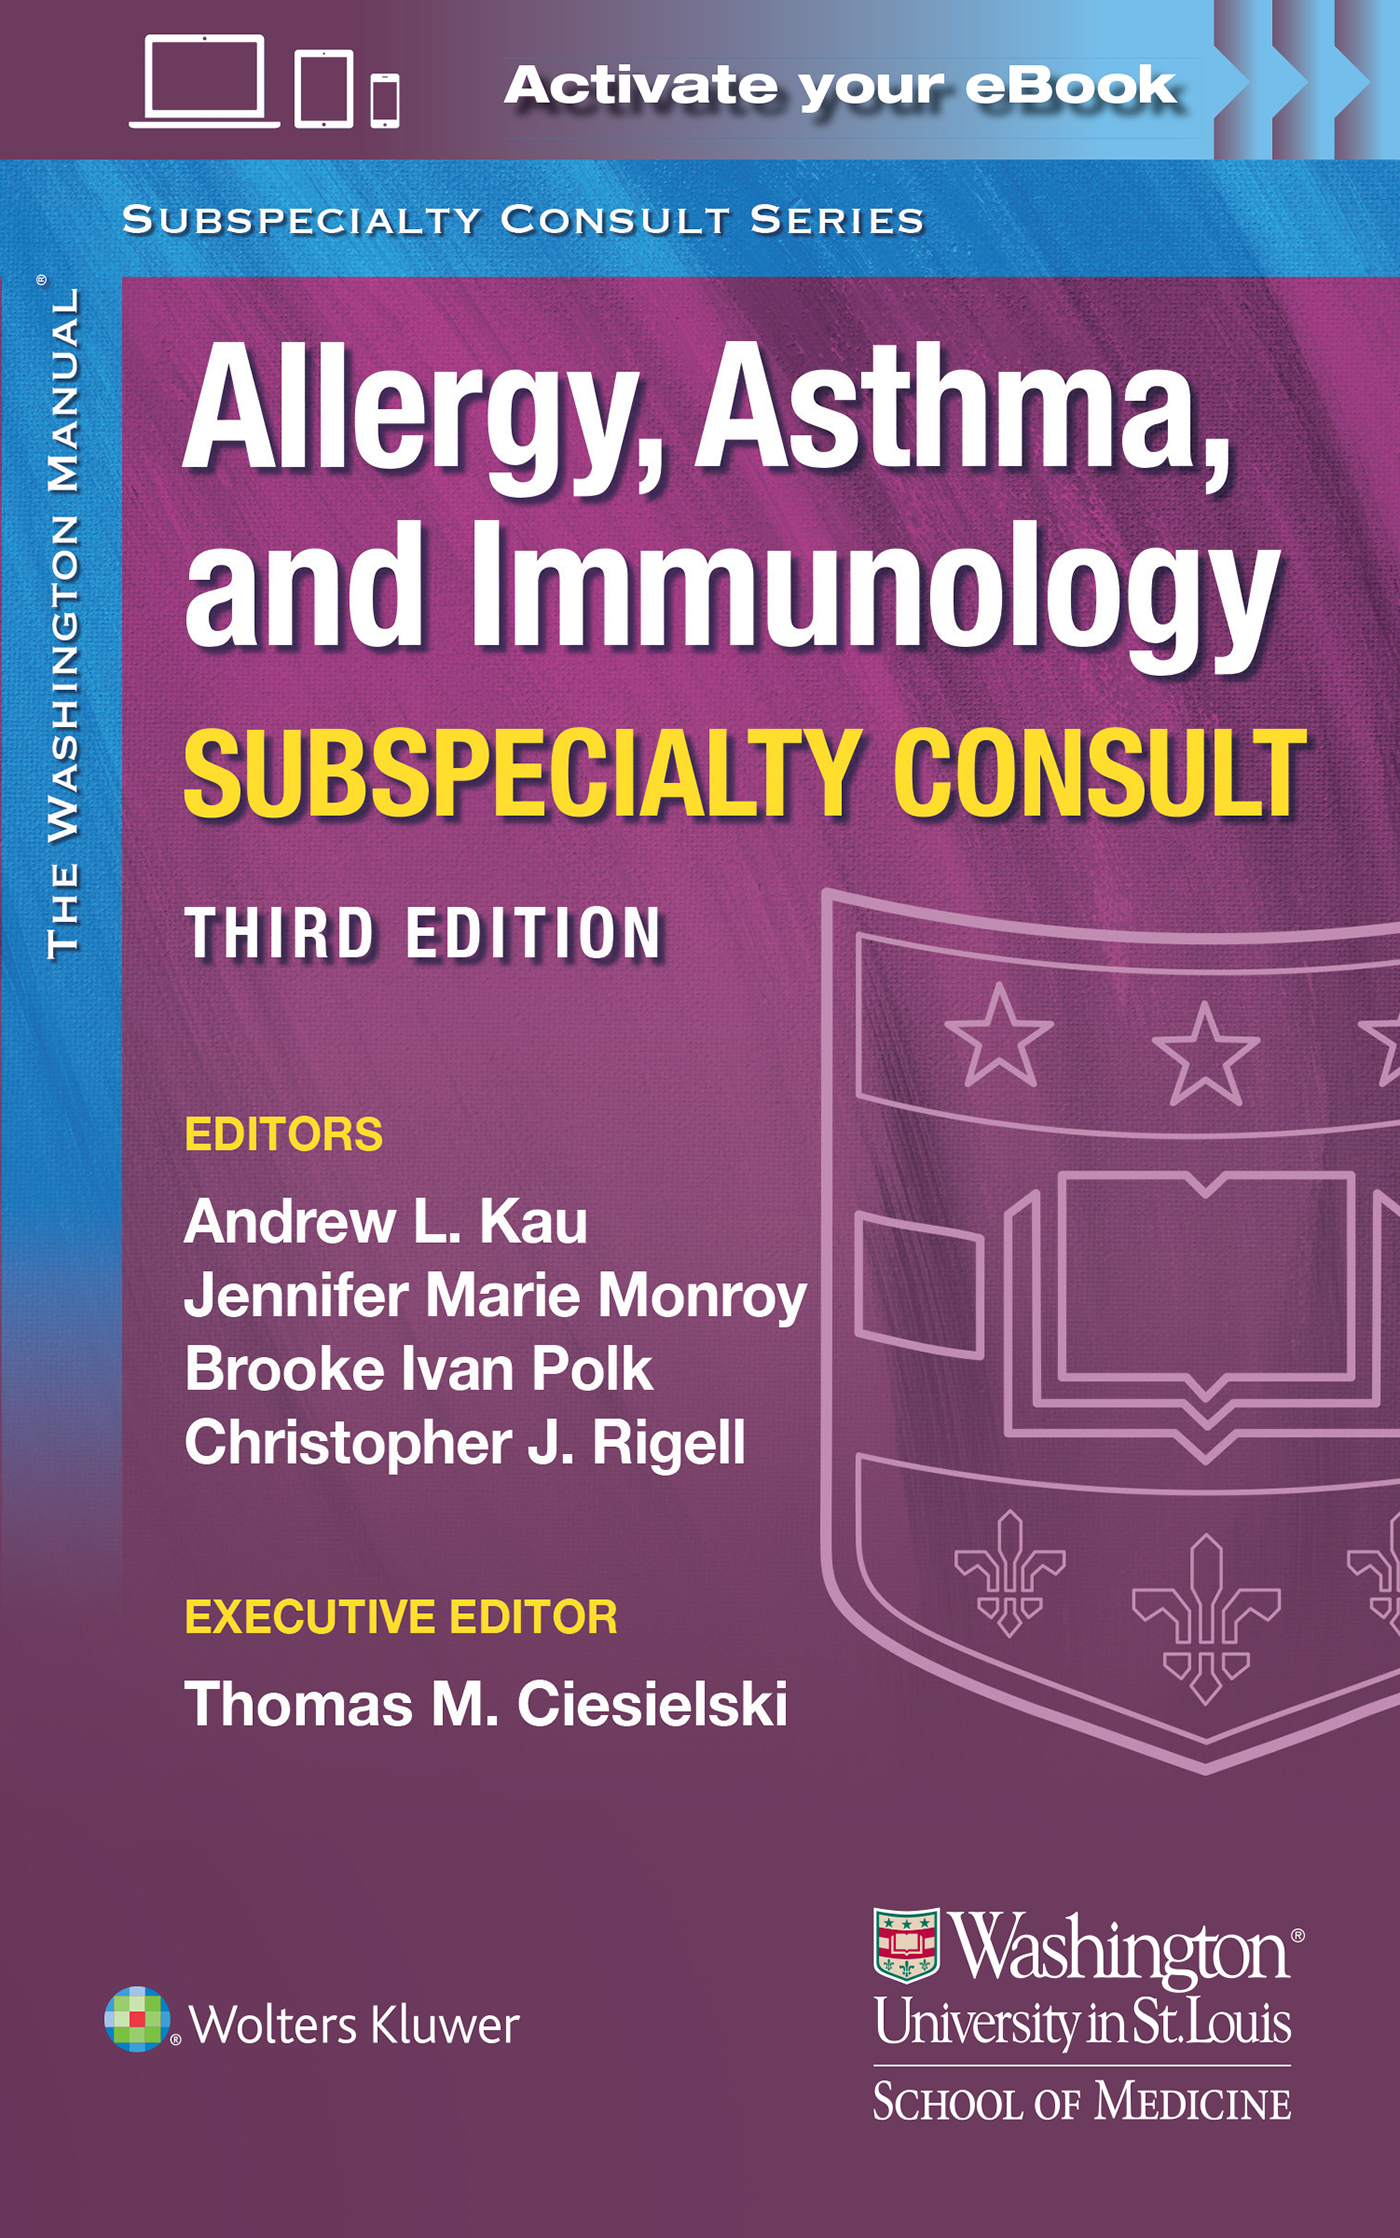 ISBN: 9781975113261 THE WASHINGTON MANUAL ALLERGY, ASTHMA, AND IMMUNOLOGY SUBSPECIALTY CONSULT